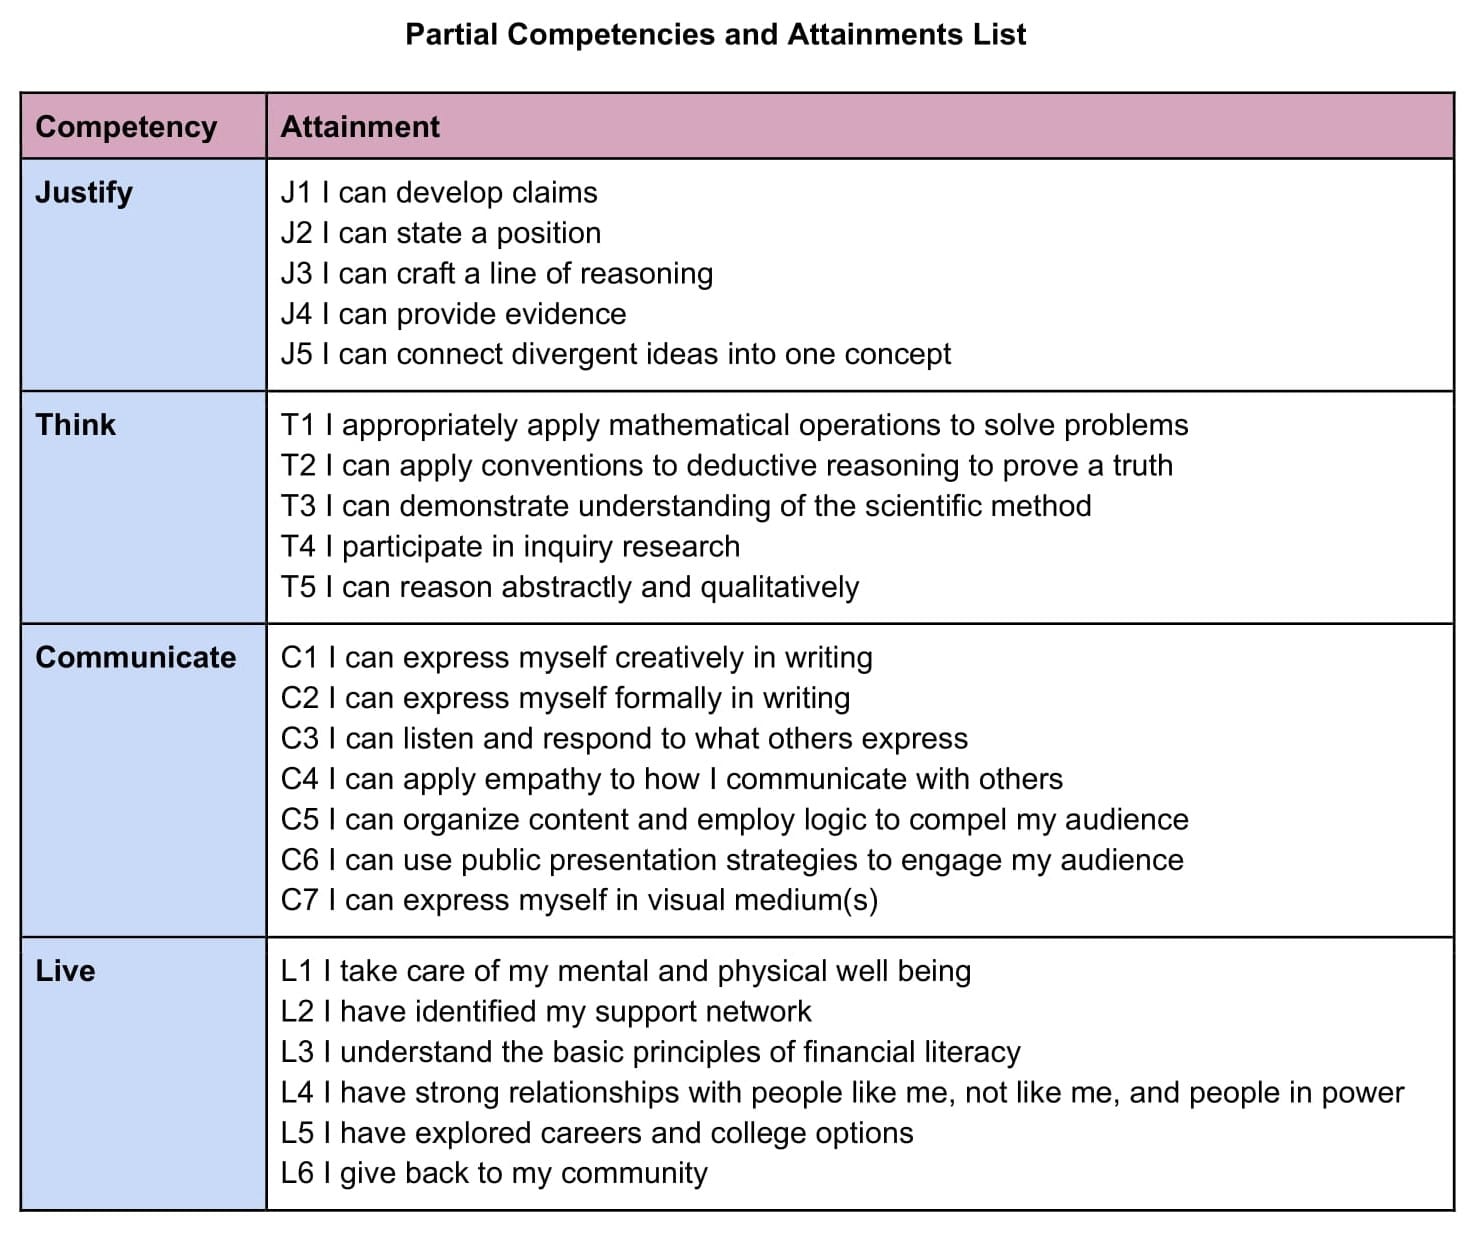 Table of Competencies and Attainments